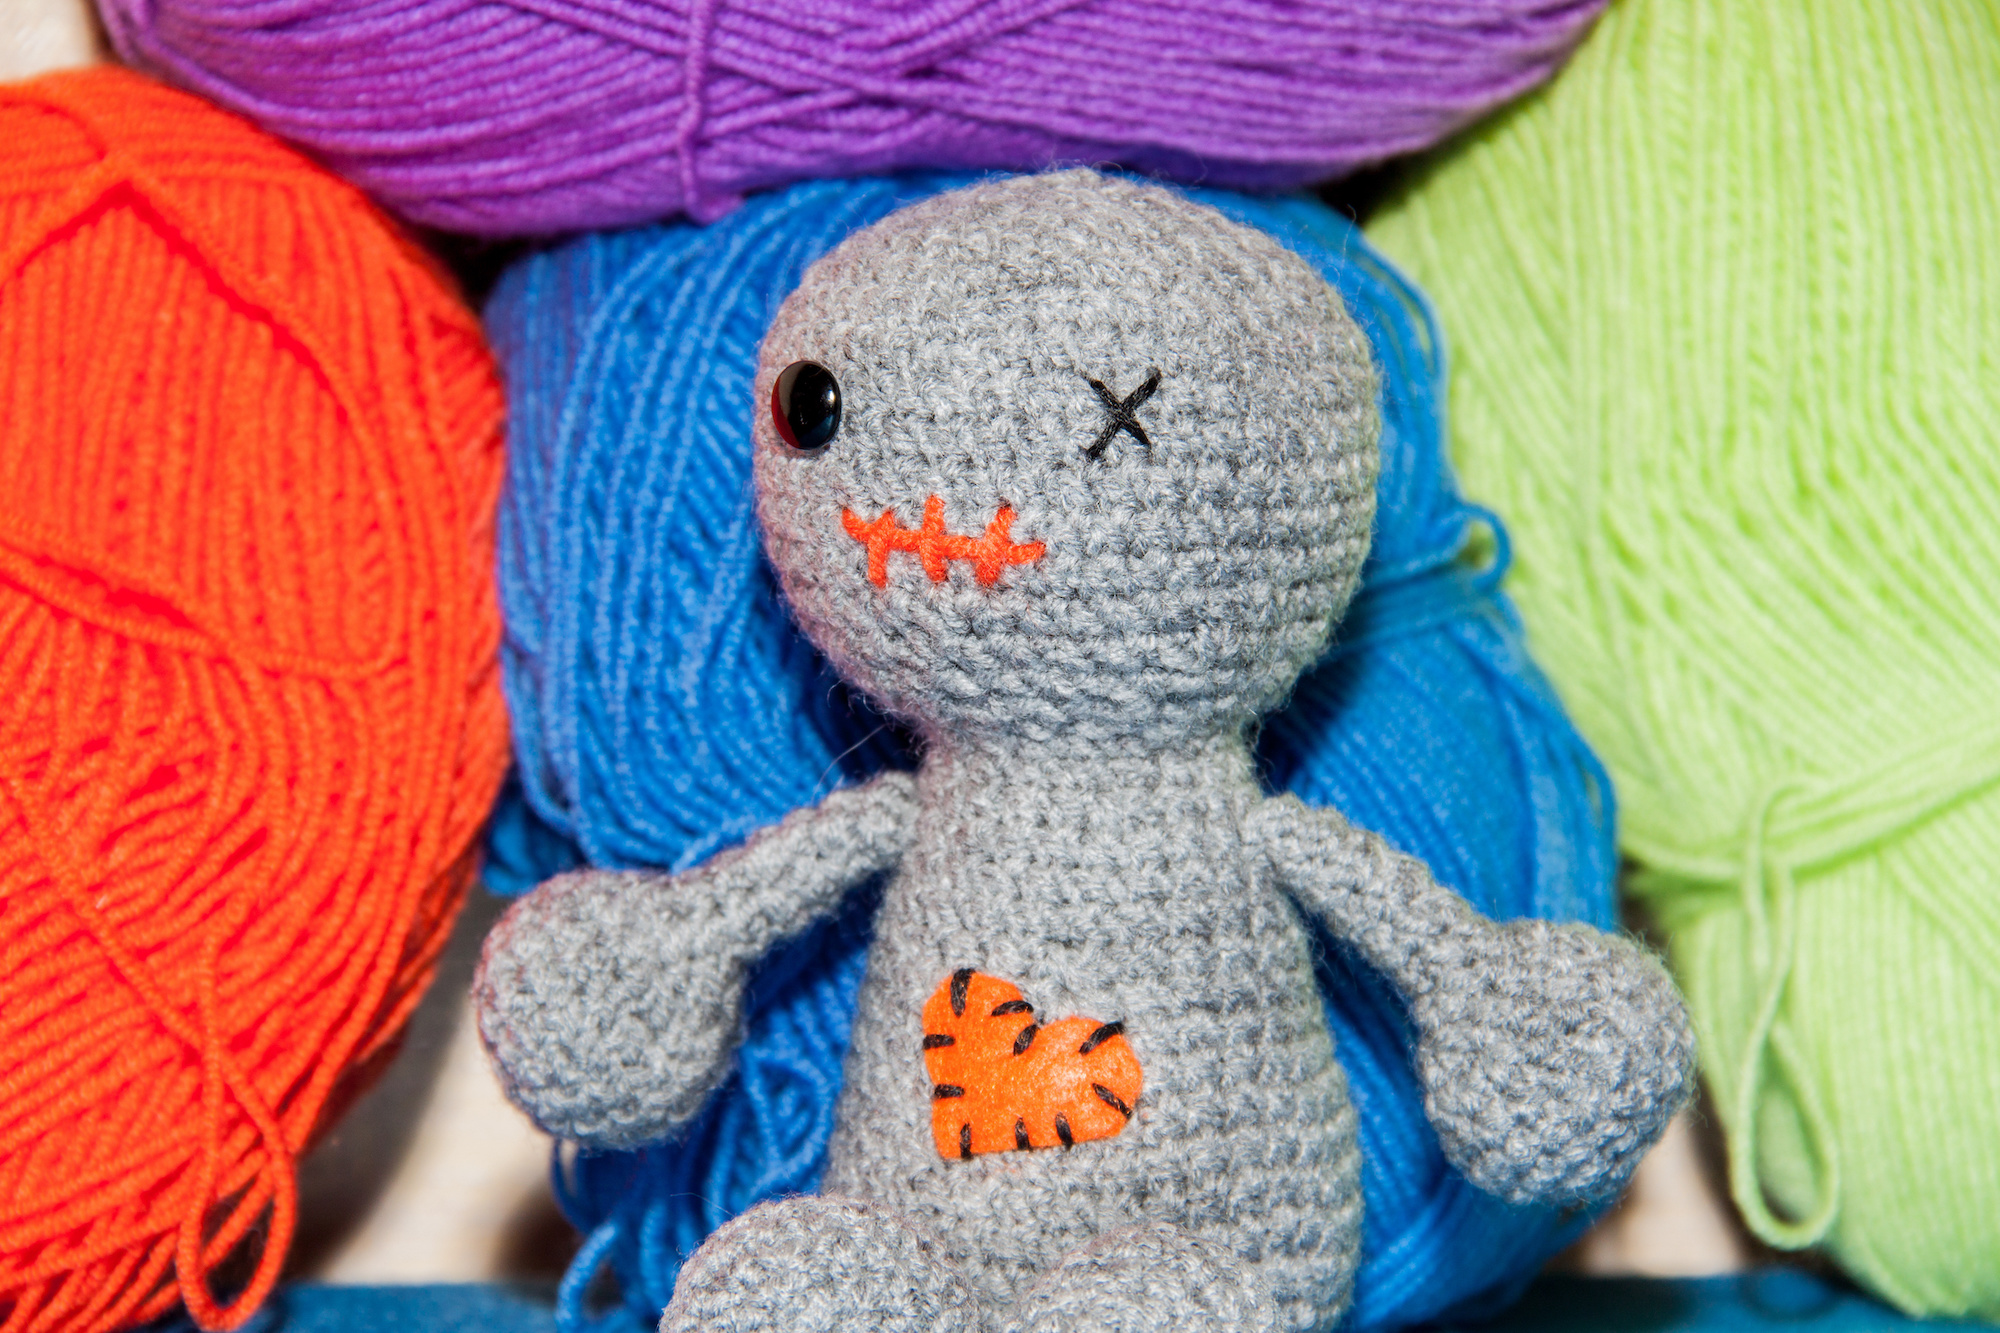 Photograph of a "zombie" knit doll sitting on top of skeins of yarn